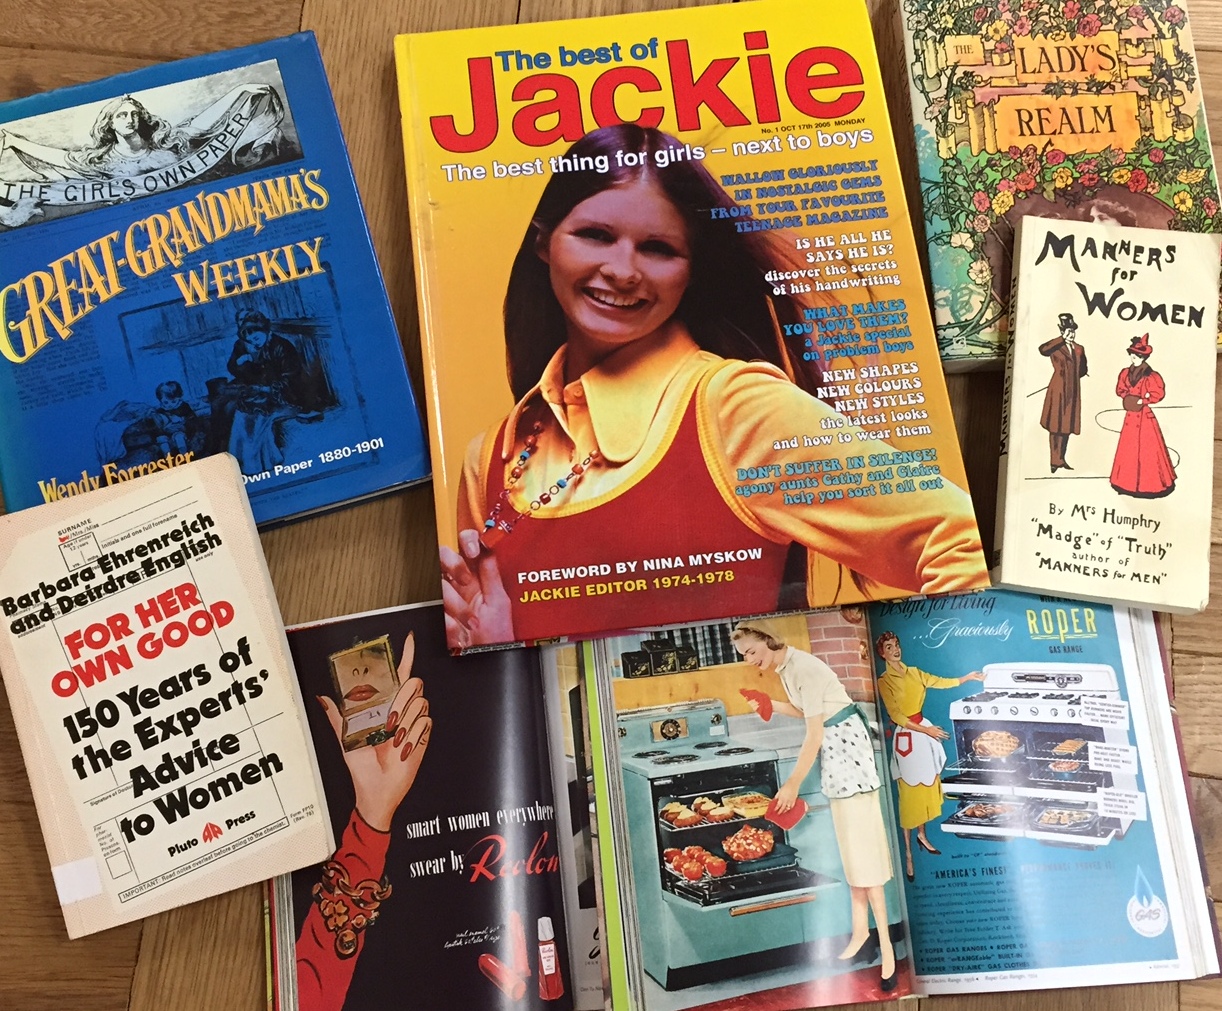 Photo of Jackie magazine from archives